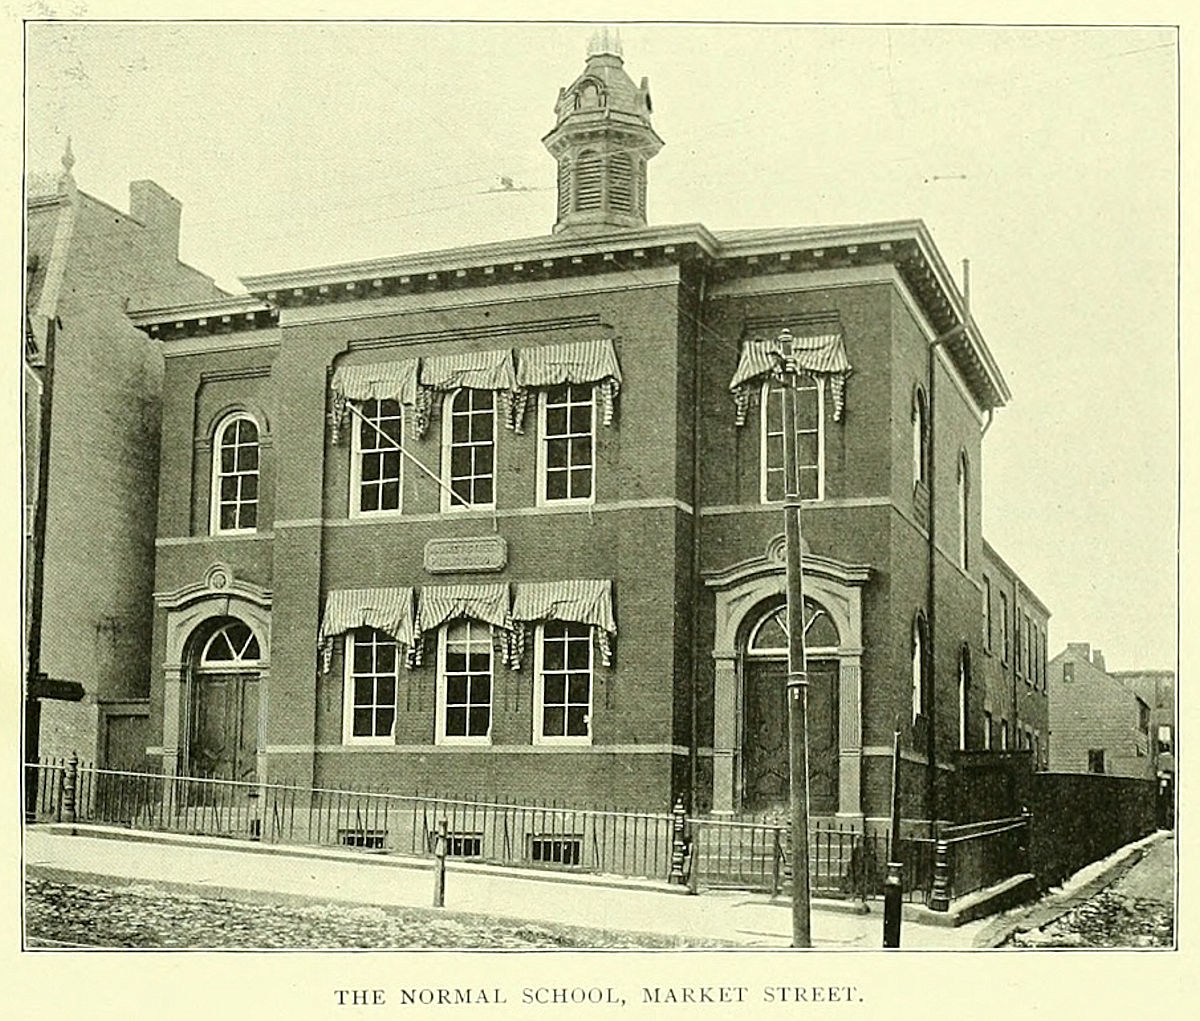 1897
Photo from Essex County Illustrated 1897
